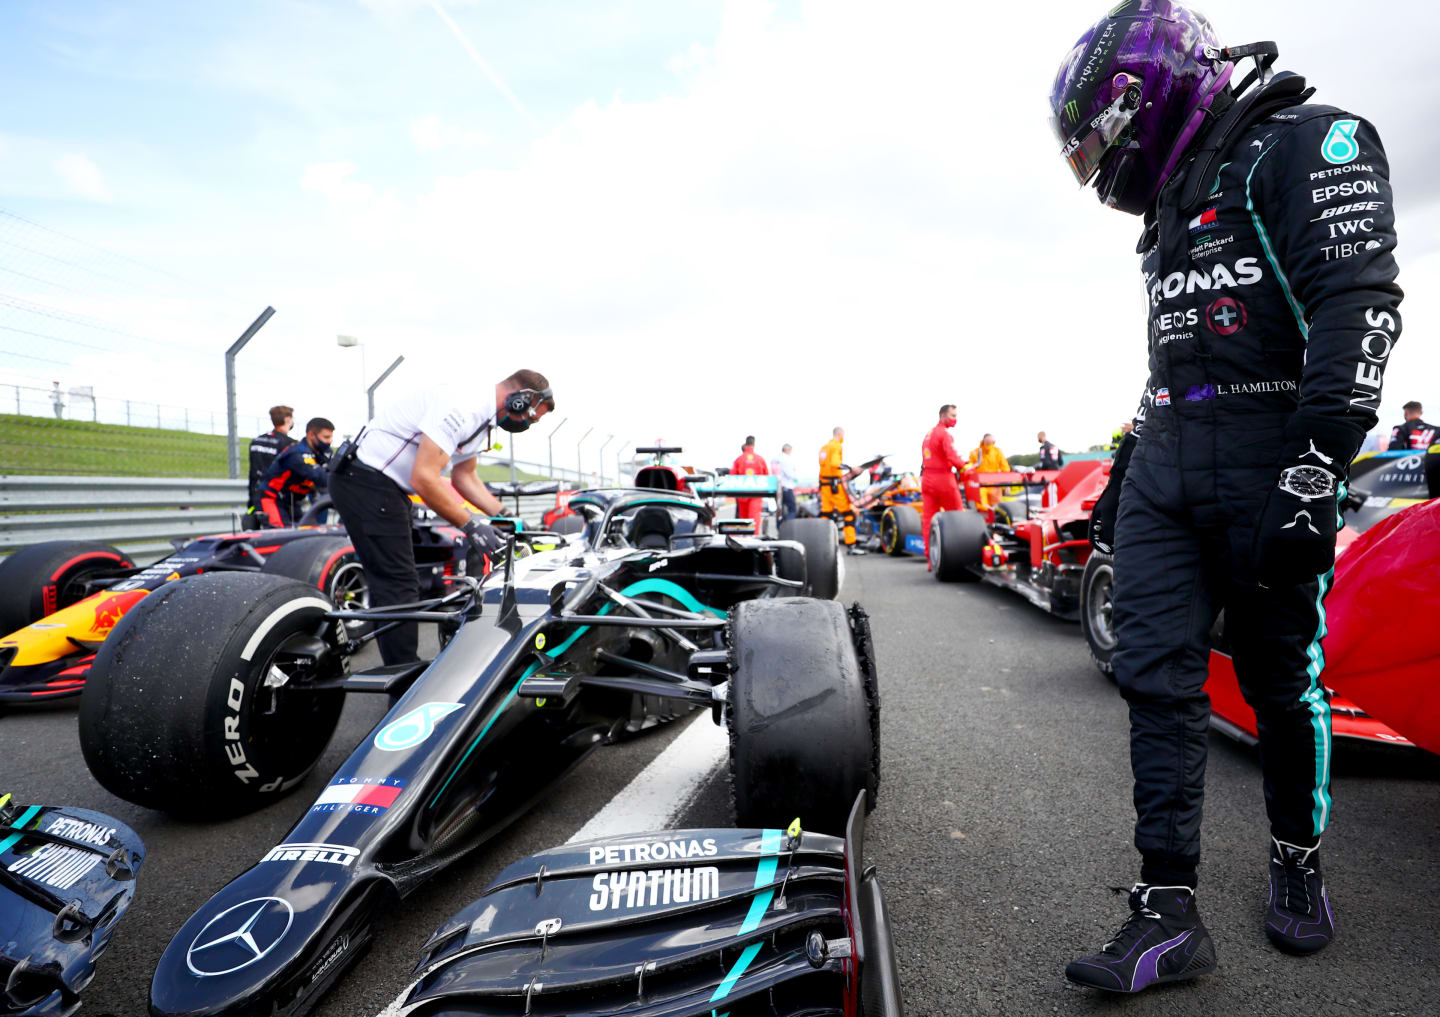 NORTHAMPTON, ENGLAND - AUGUST 02: Lewis Hamilton of Great Britain and Mercedes GP inspects his punctured tyre in parc ferme after the Formula One Grand Prix of Hungary at Silverstone on August 02, 2020 in Northampton, England. (Photo by Dan Istitene - Formula 1/Formula 1 via Getty Images)